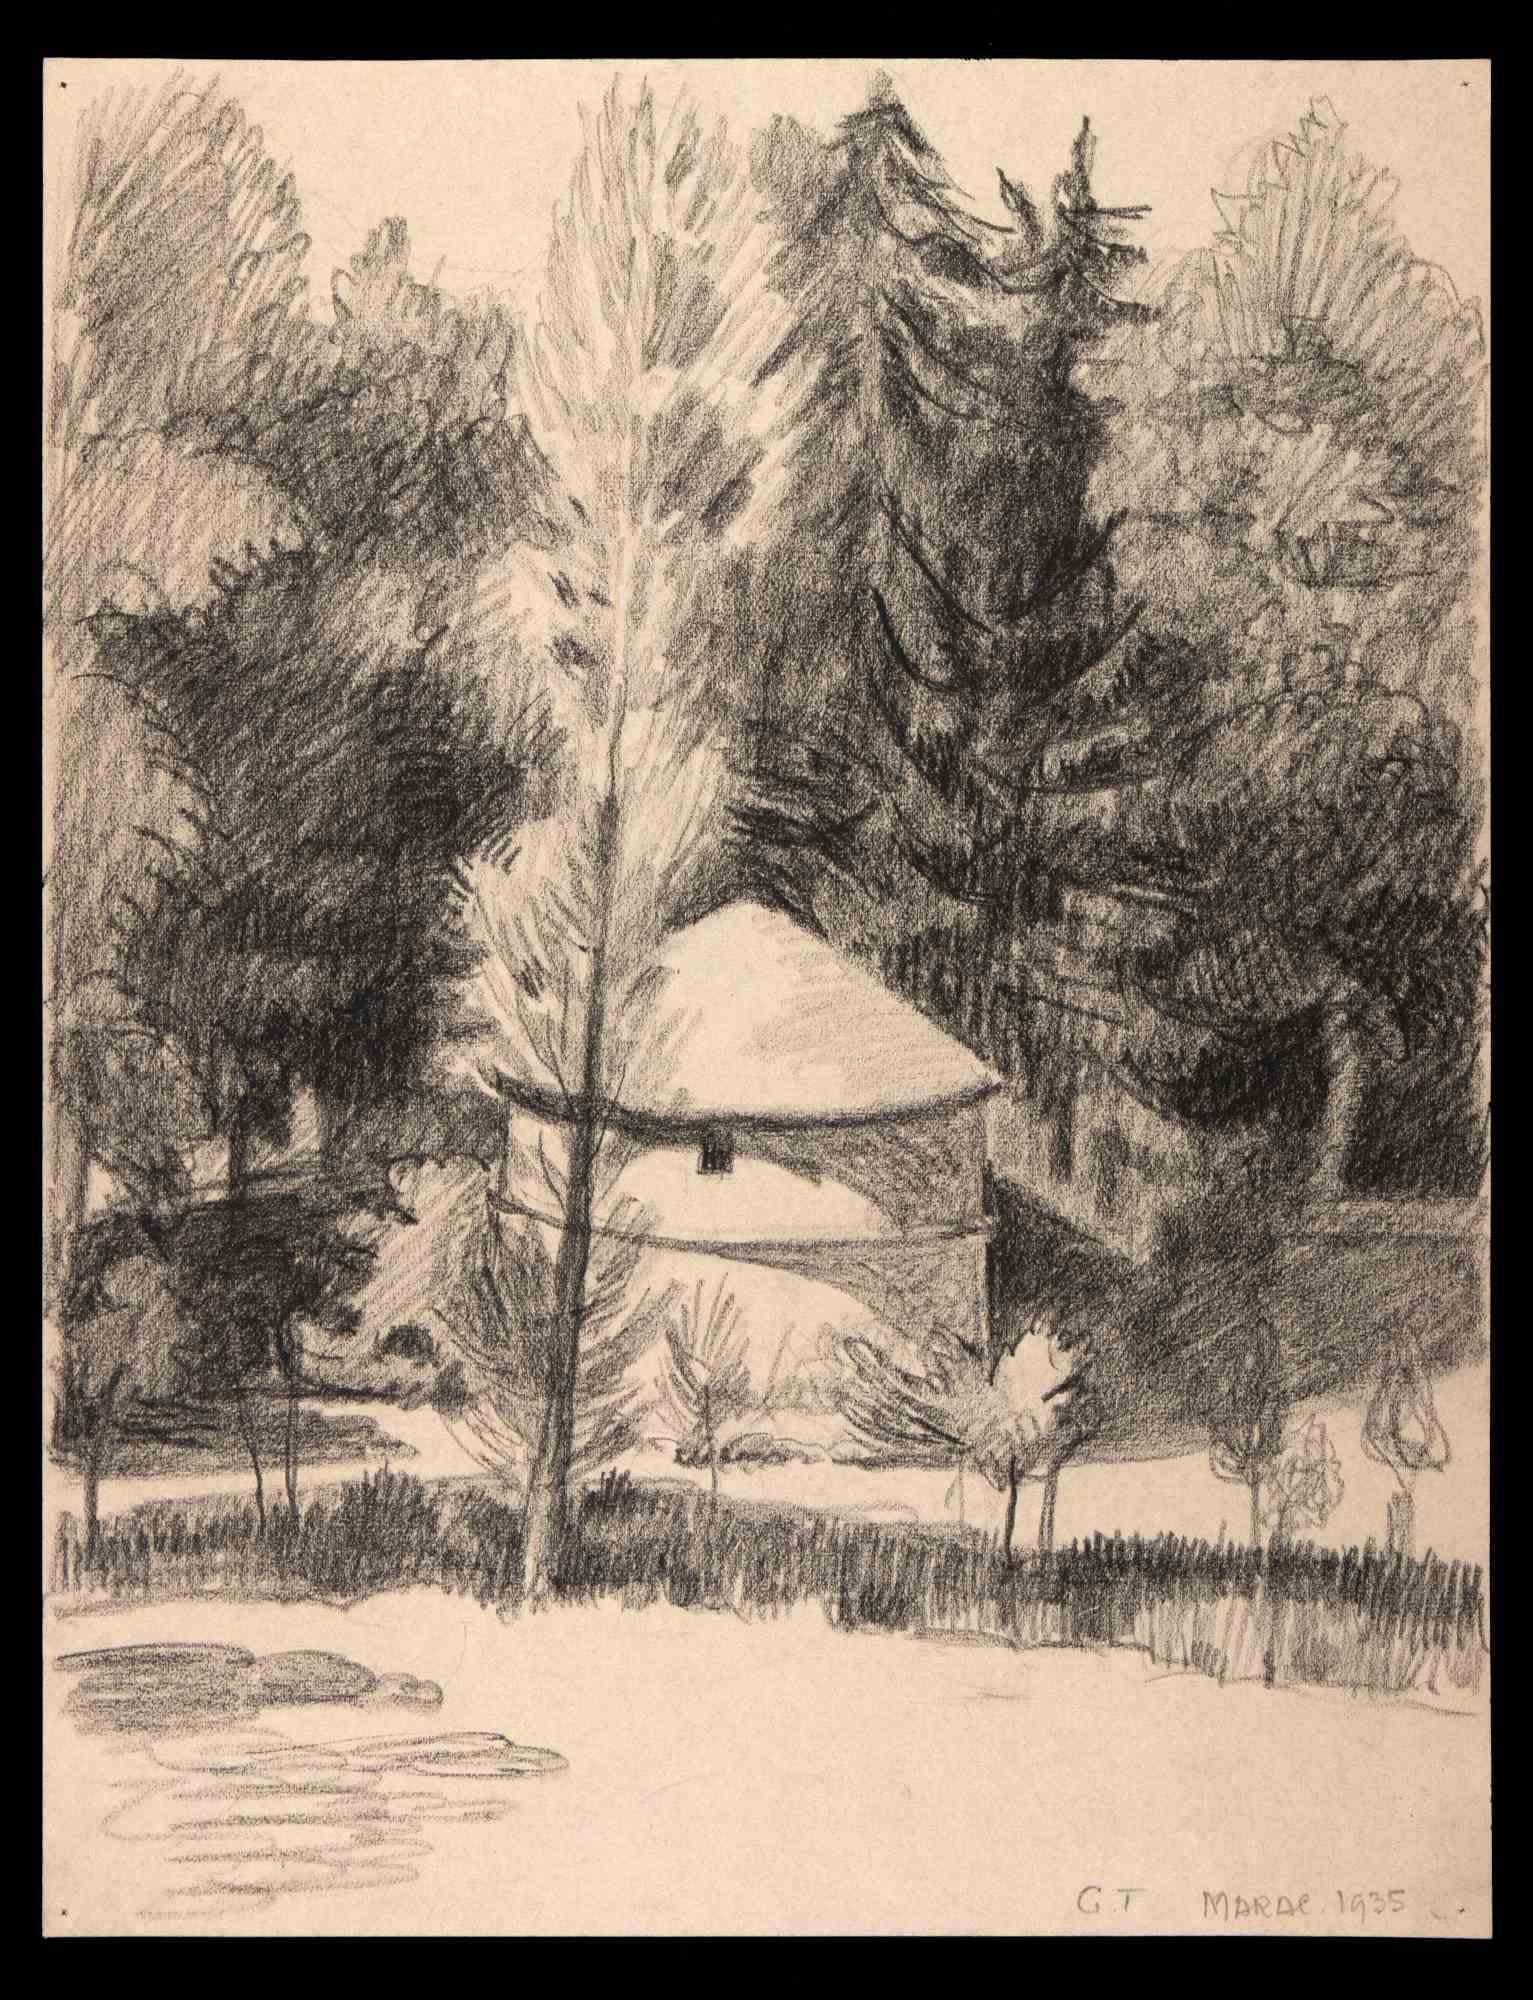 Georges-Henri Tribout Figurative Art - Landscape with Trees - Original Drawing by George-Henri Tribout - 1935